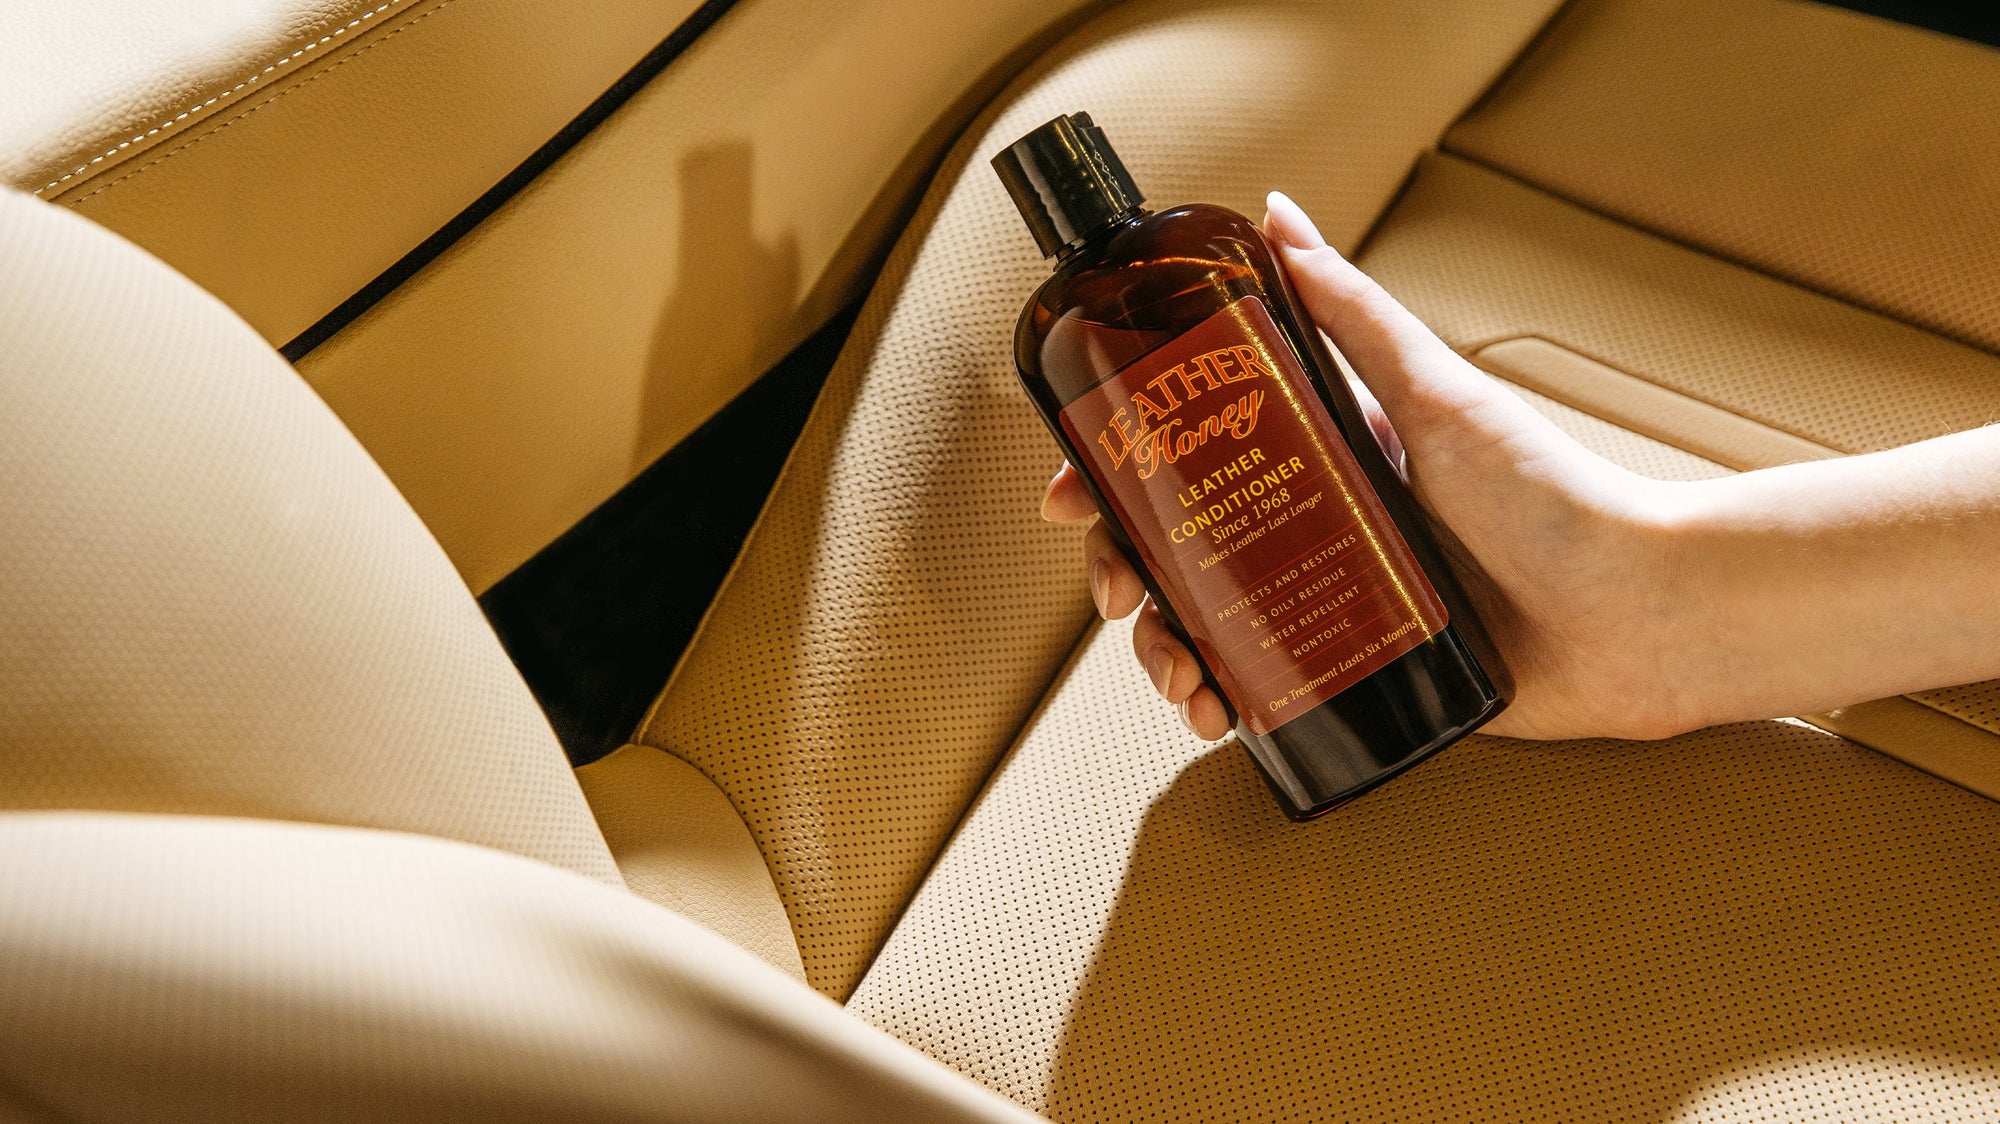 New) Leather-Honey Leather Cleaner & Conditioner (2 piece set) - general  for sale - by owner - craigslist